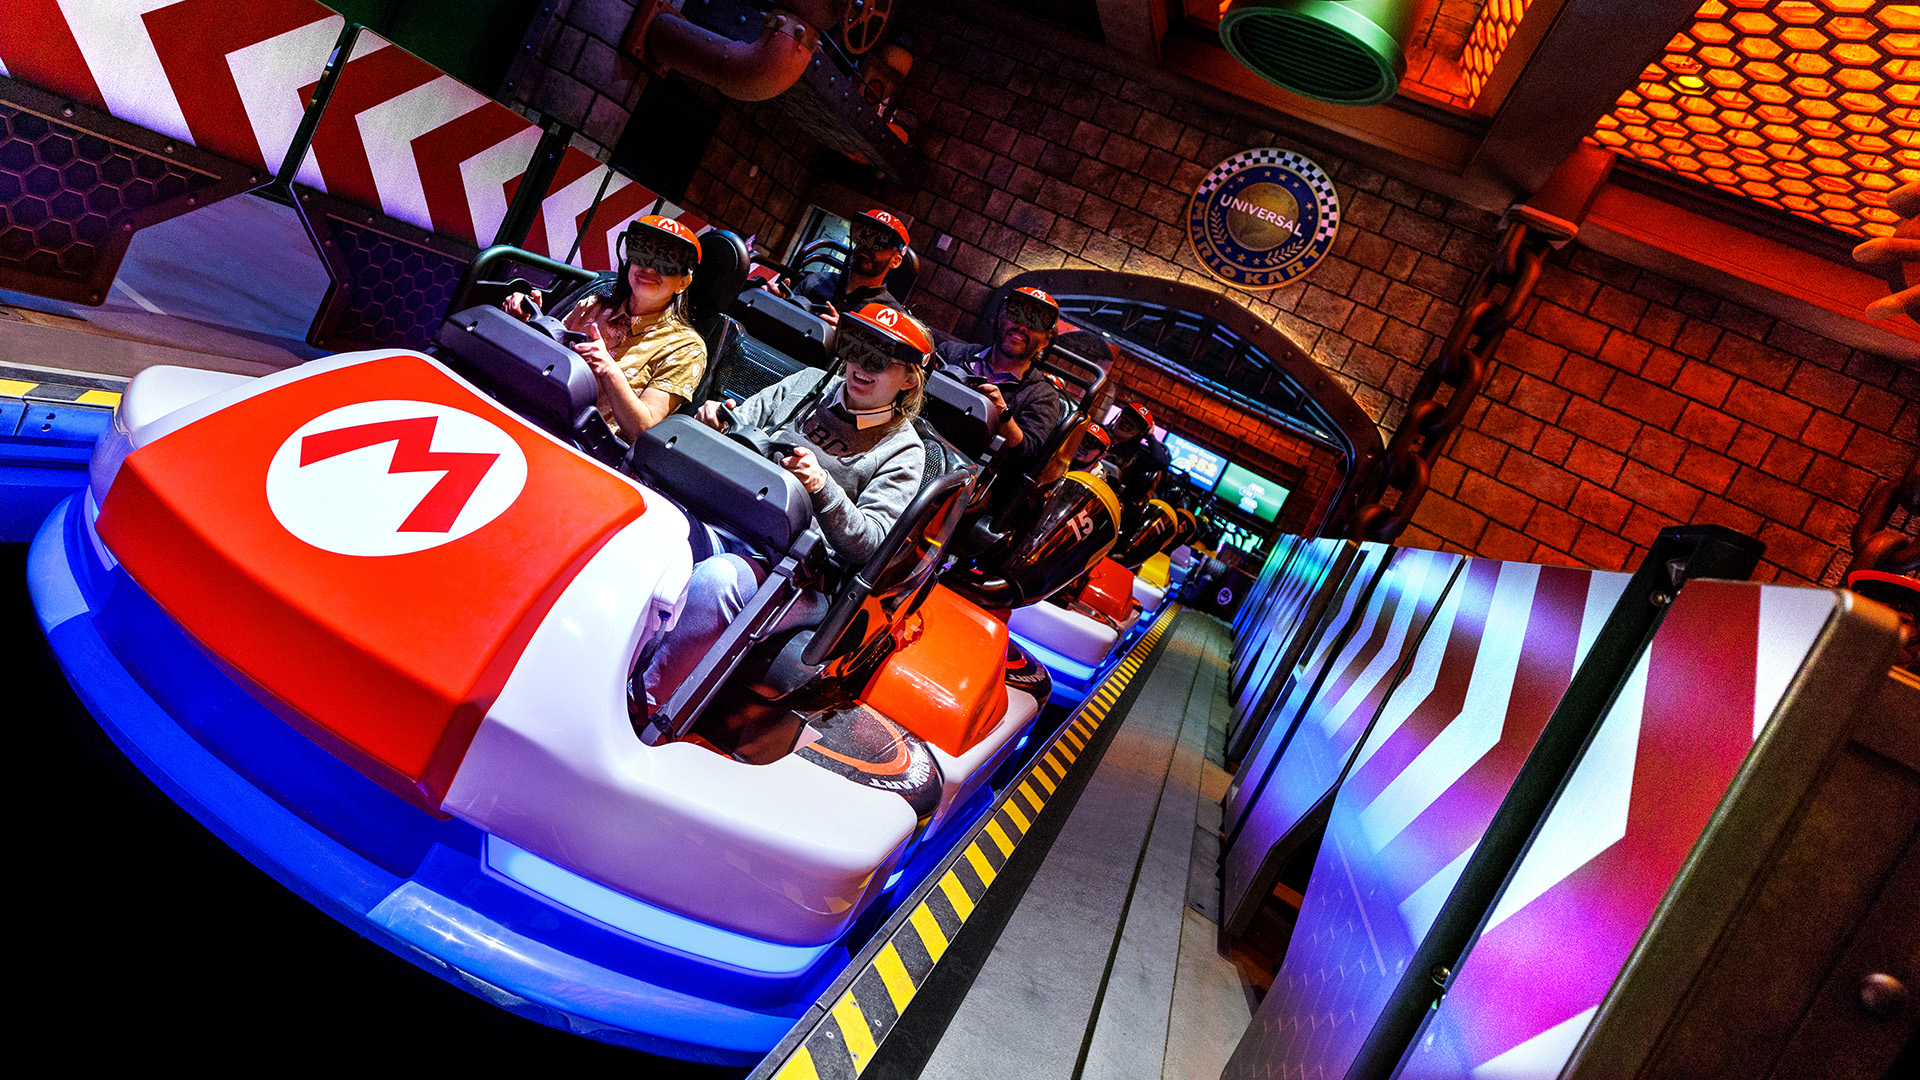 Universal Studios Hollywood shared this image of the new ride, “Mario Kart: Bowser’s Challenge,” opening in early 2023 at the theme park's Super Nintendo World.